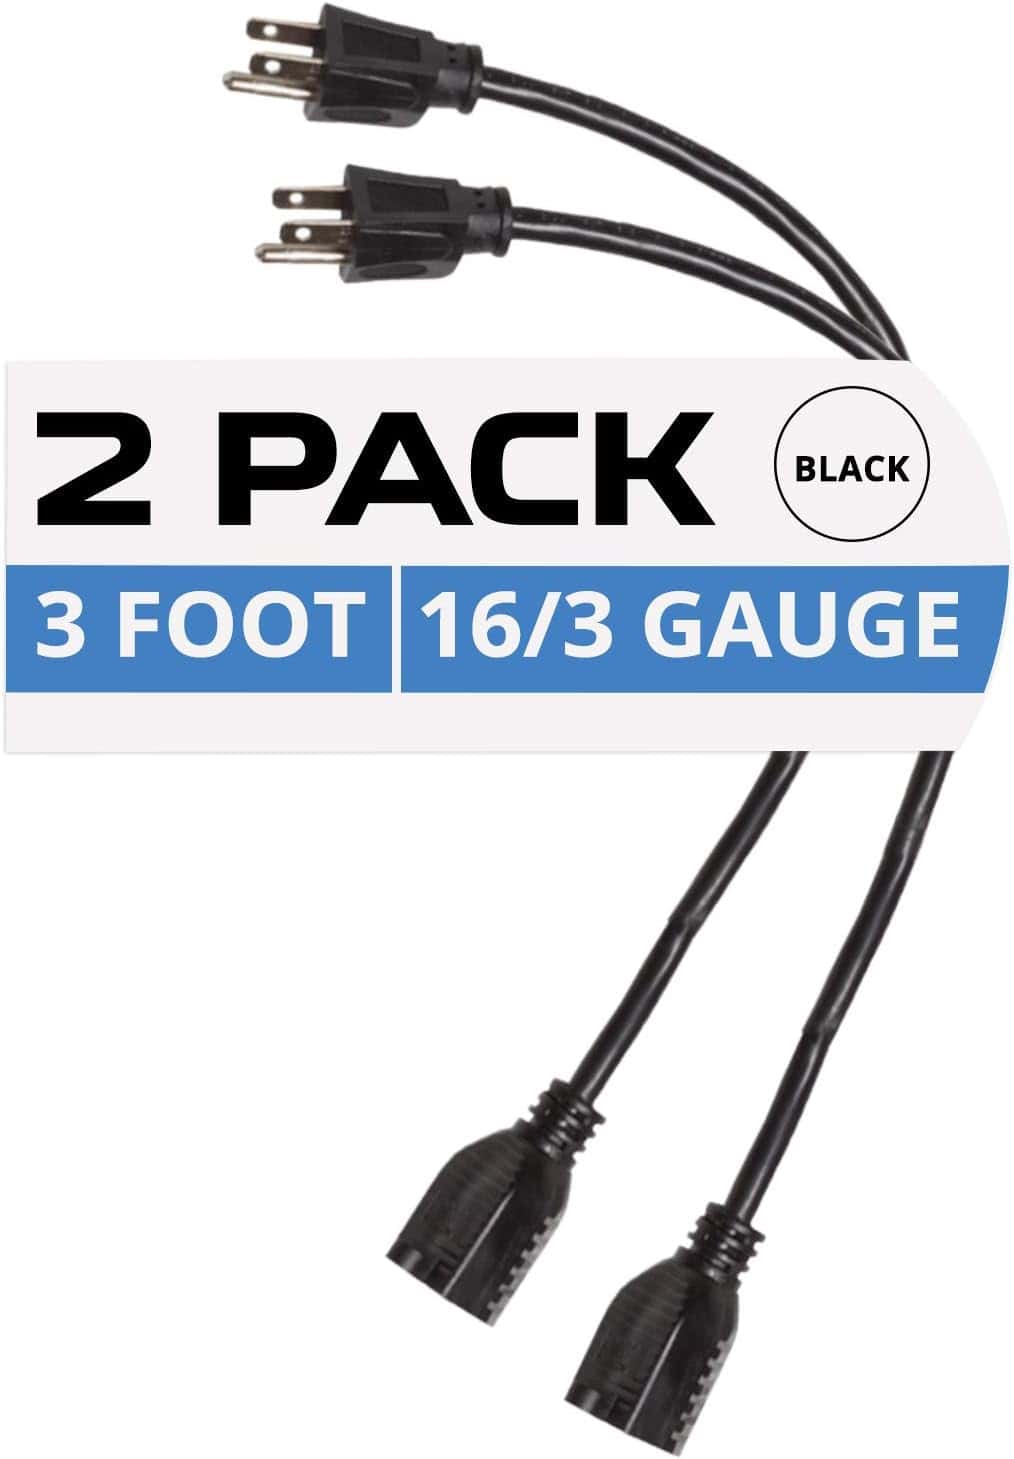 Iron Forge Cable 2 Pack Extension Cord 3 Feet 16 AWG 3 Foot Black Extension Cord Indoor Outdoor Use 3 Prong Multipack Weatherproof Exterior Extension Cord Great for Gardens Landscaping Lawn Mower 1